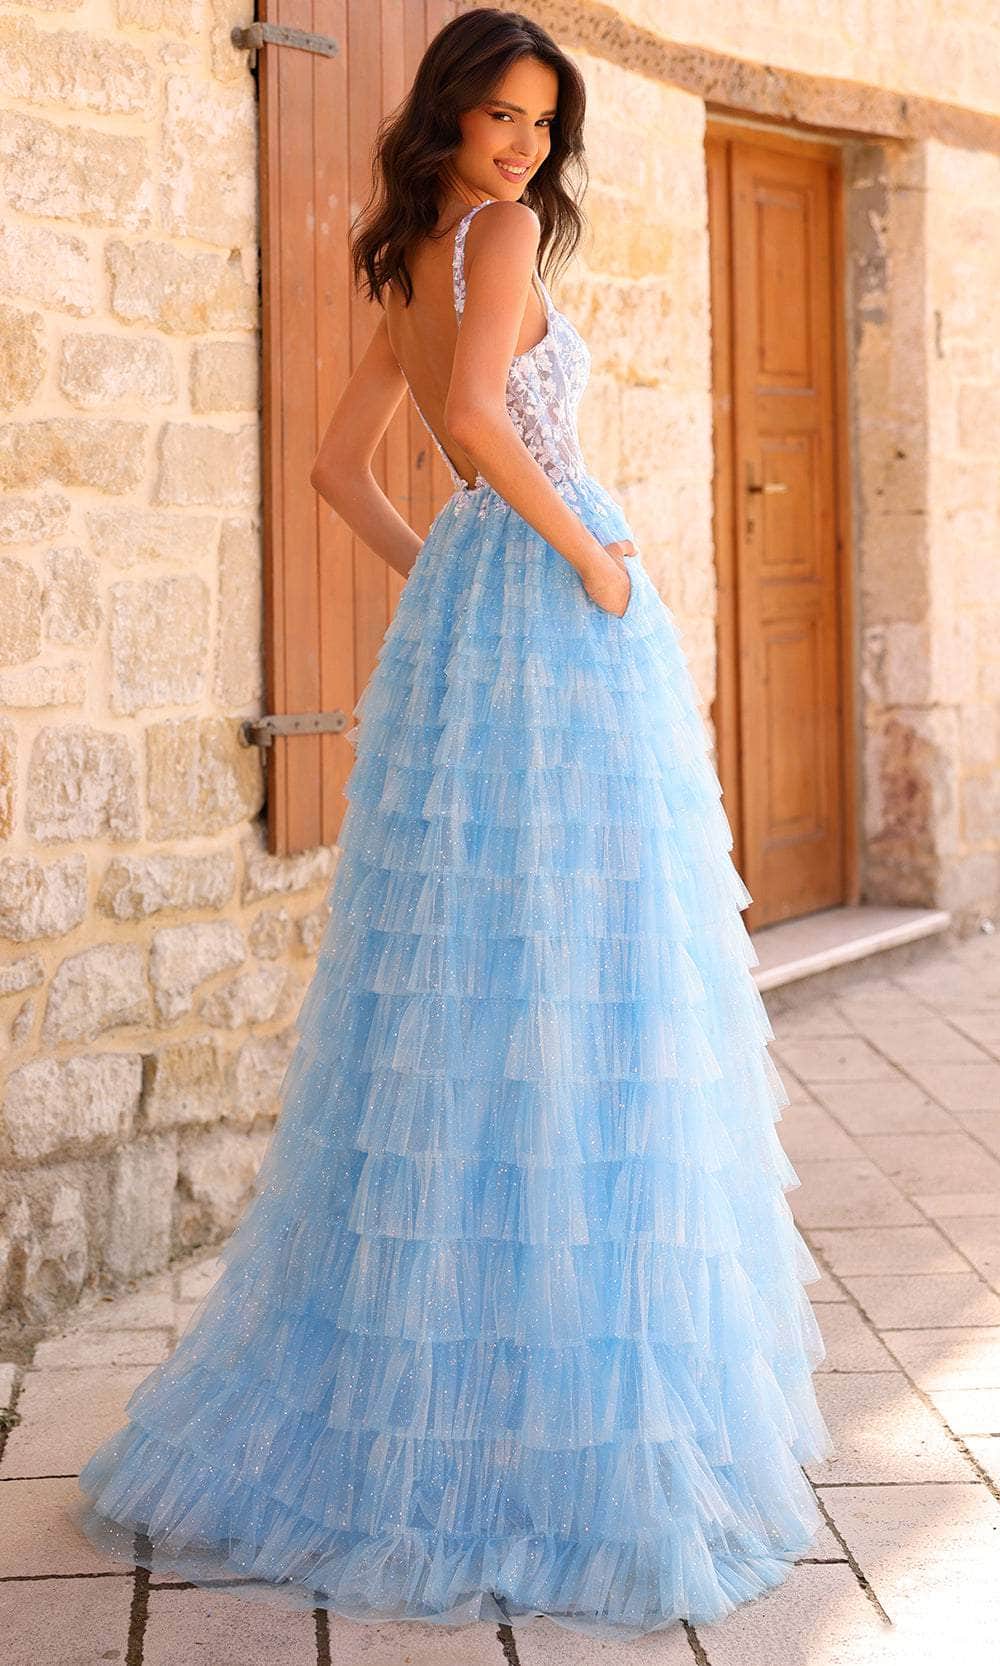 Amarra 88833 - Embroidered Prom Dress